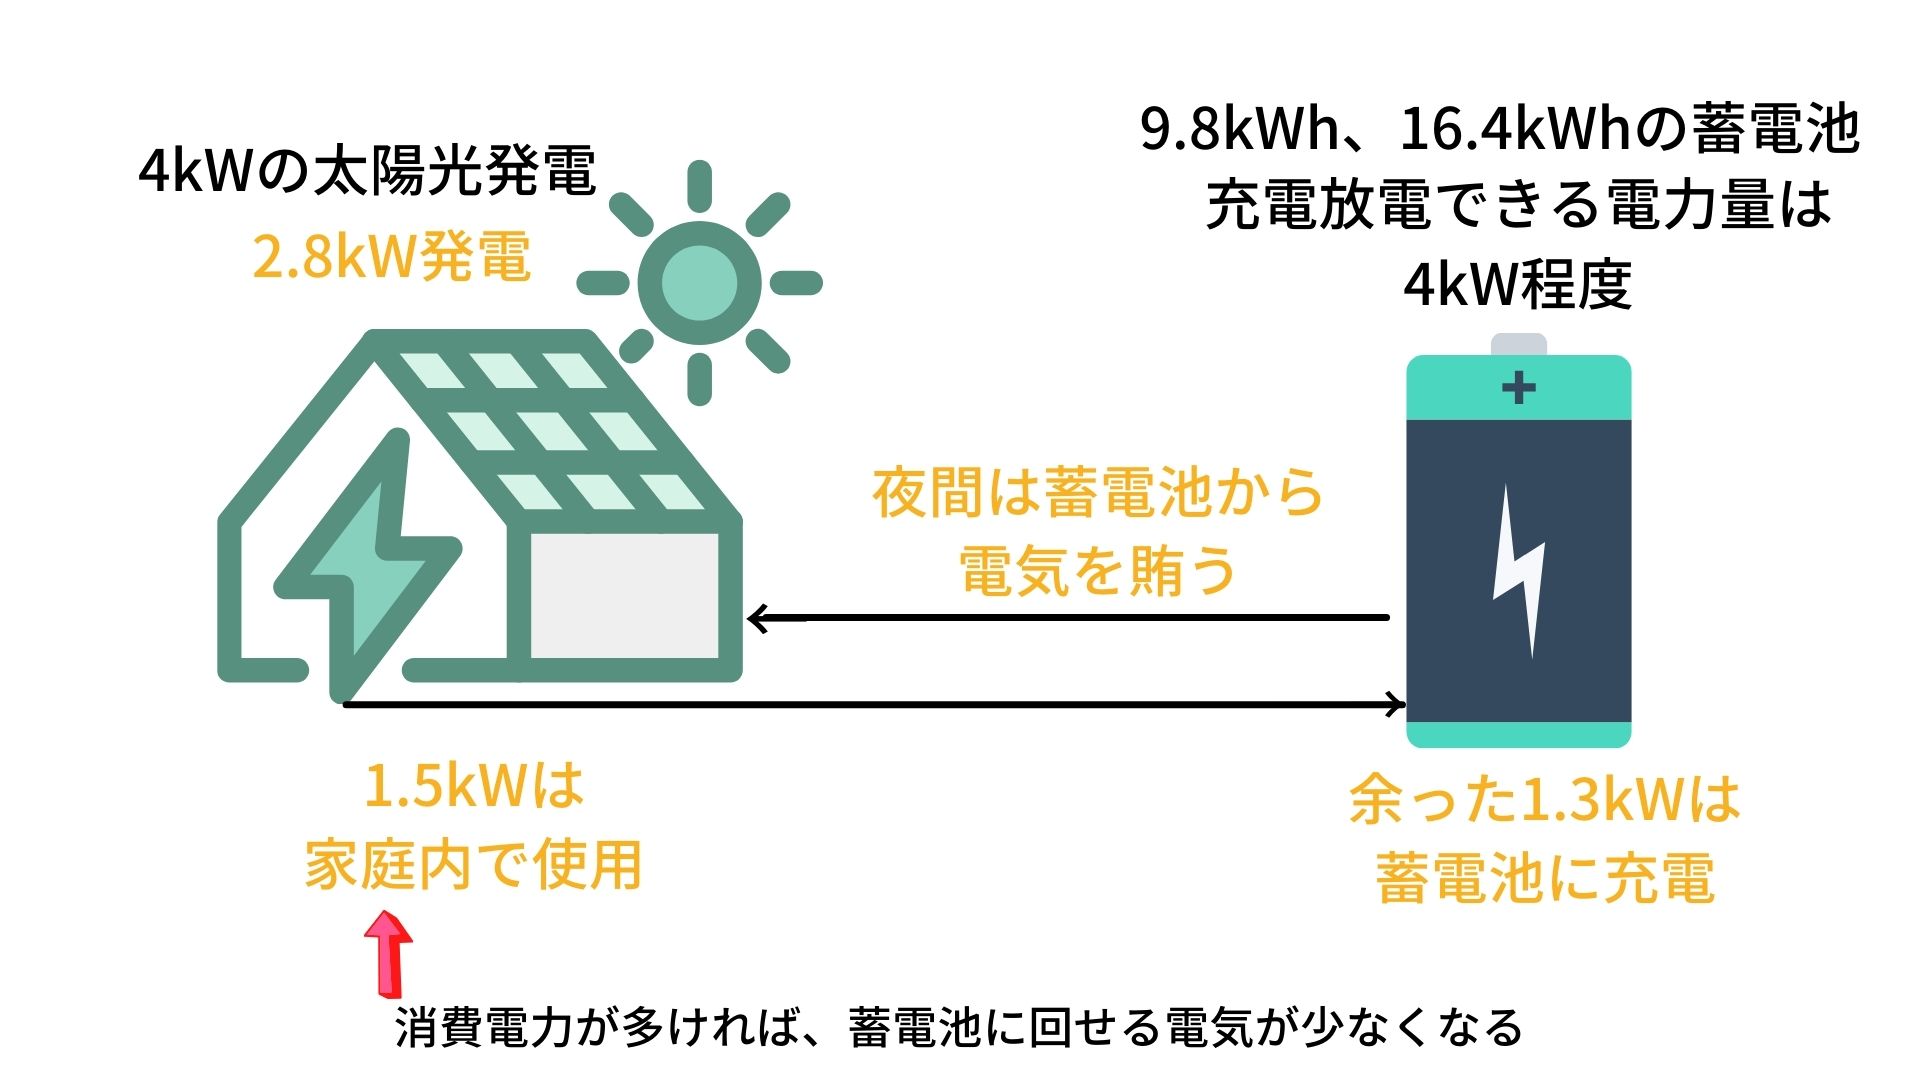 affinity-of-photovoltaic-power-generation-and-storage-battery